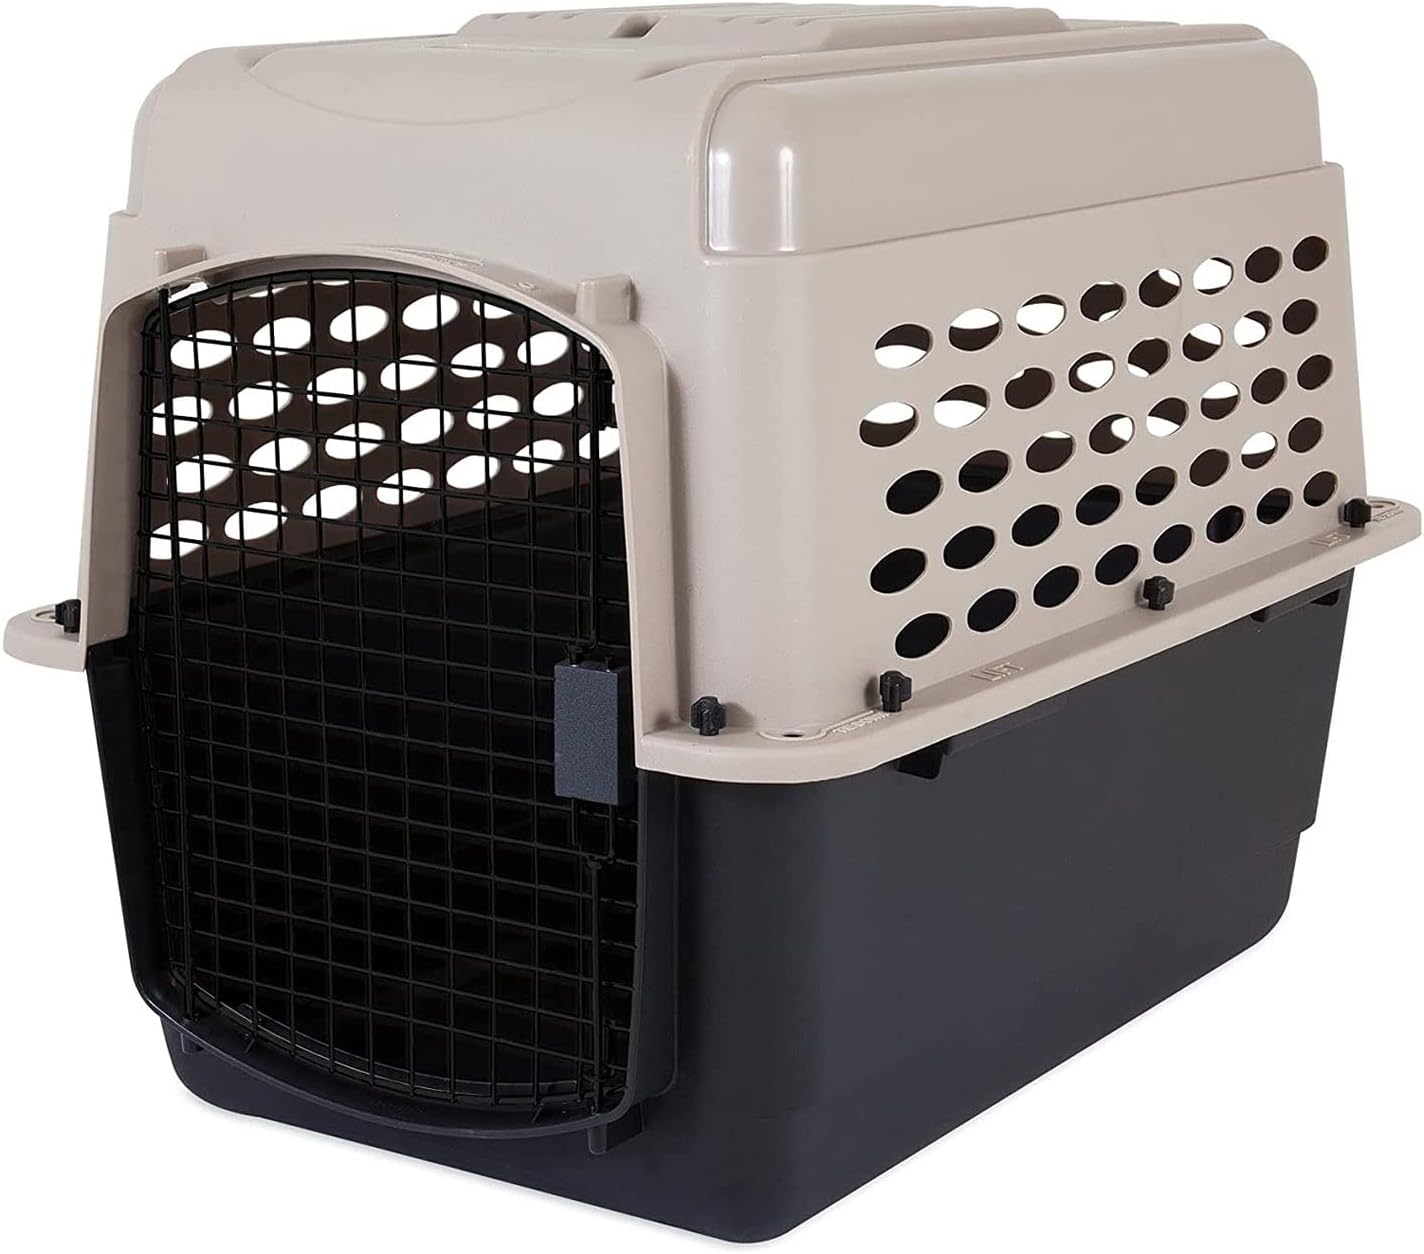 Petmate Vari Dog Kennel 32", Taupe & Black, Portable Dog Crate for Pets 30-50lbs, Made in USA